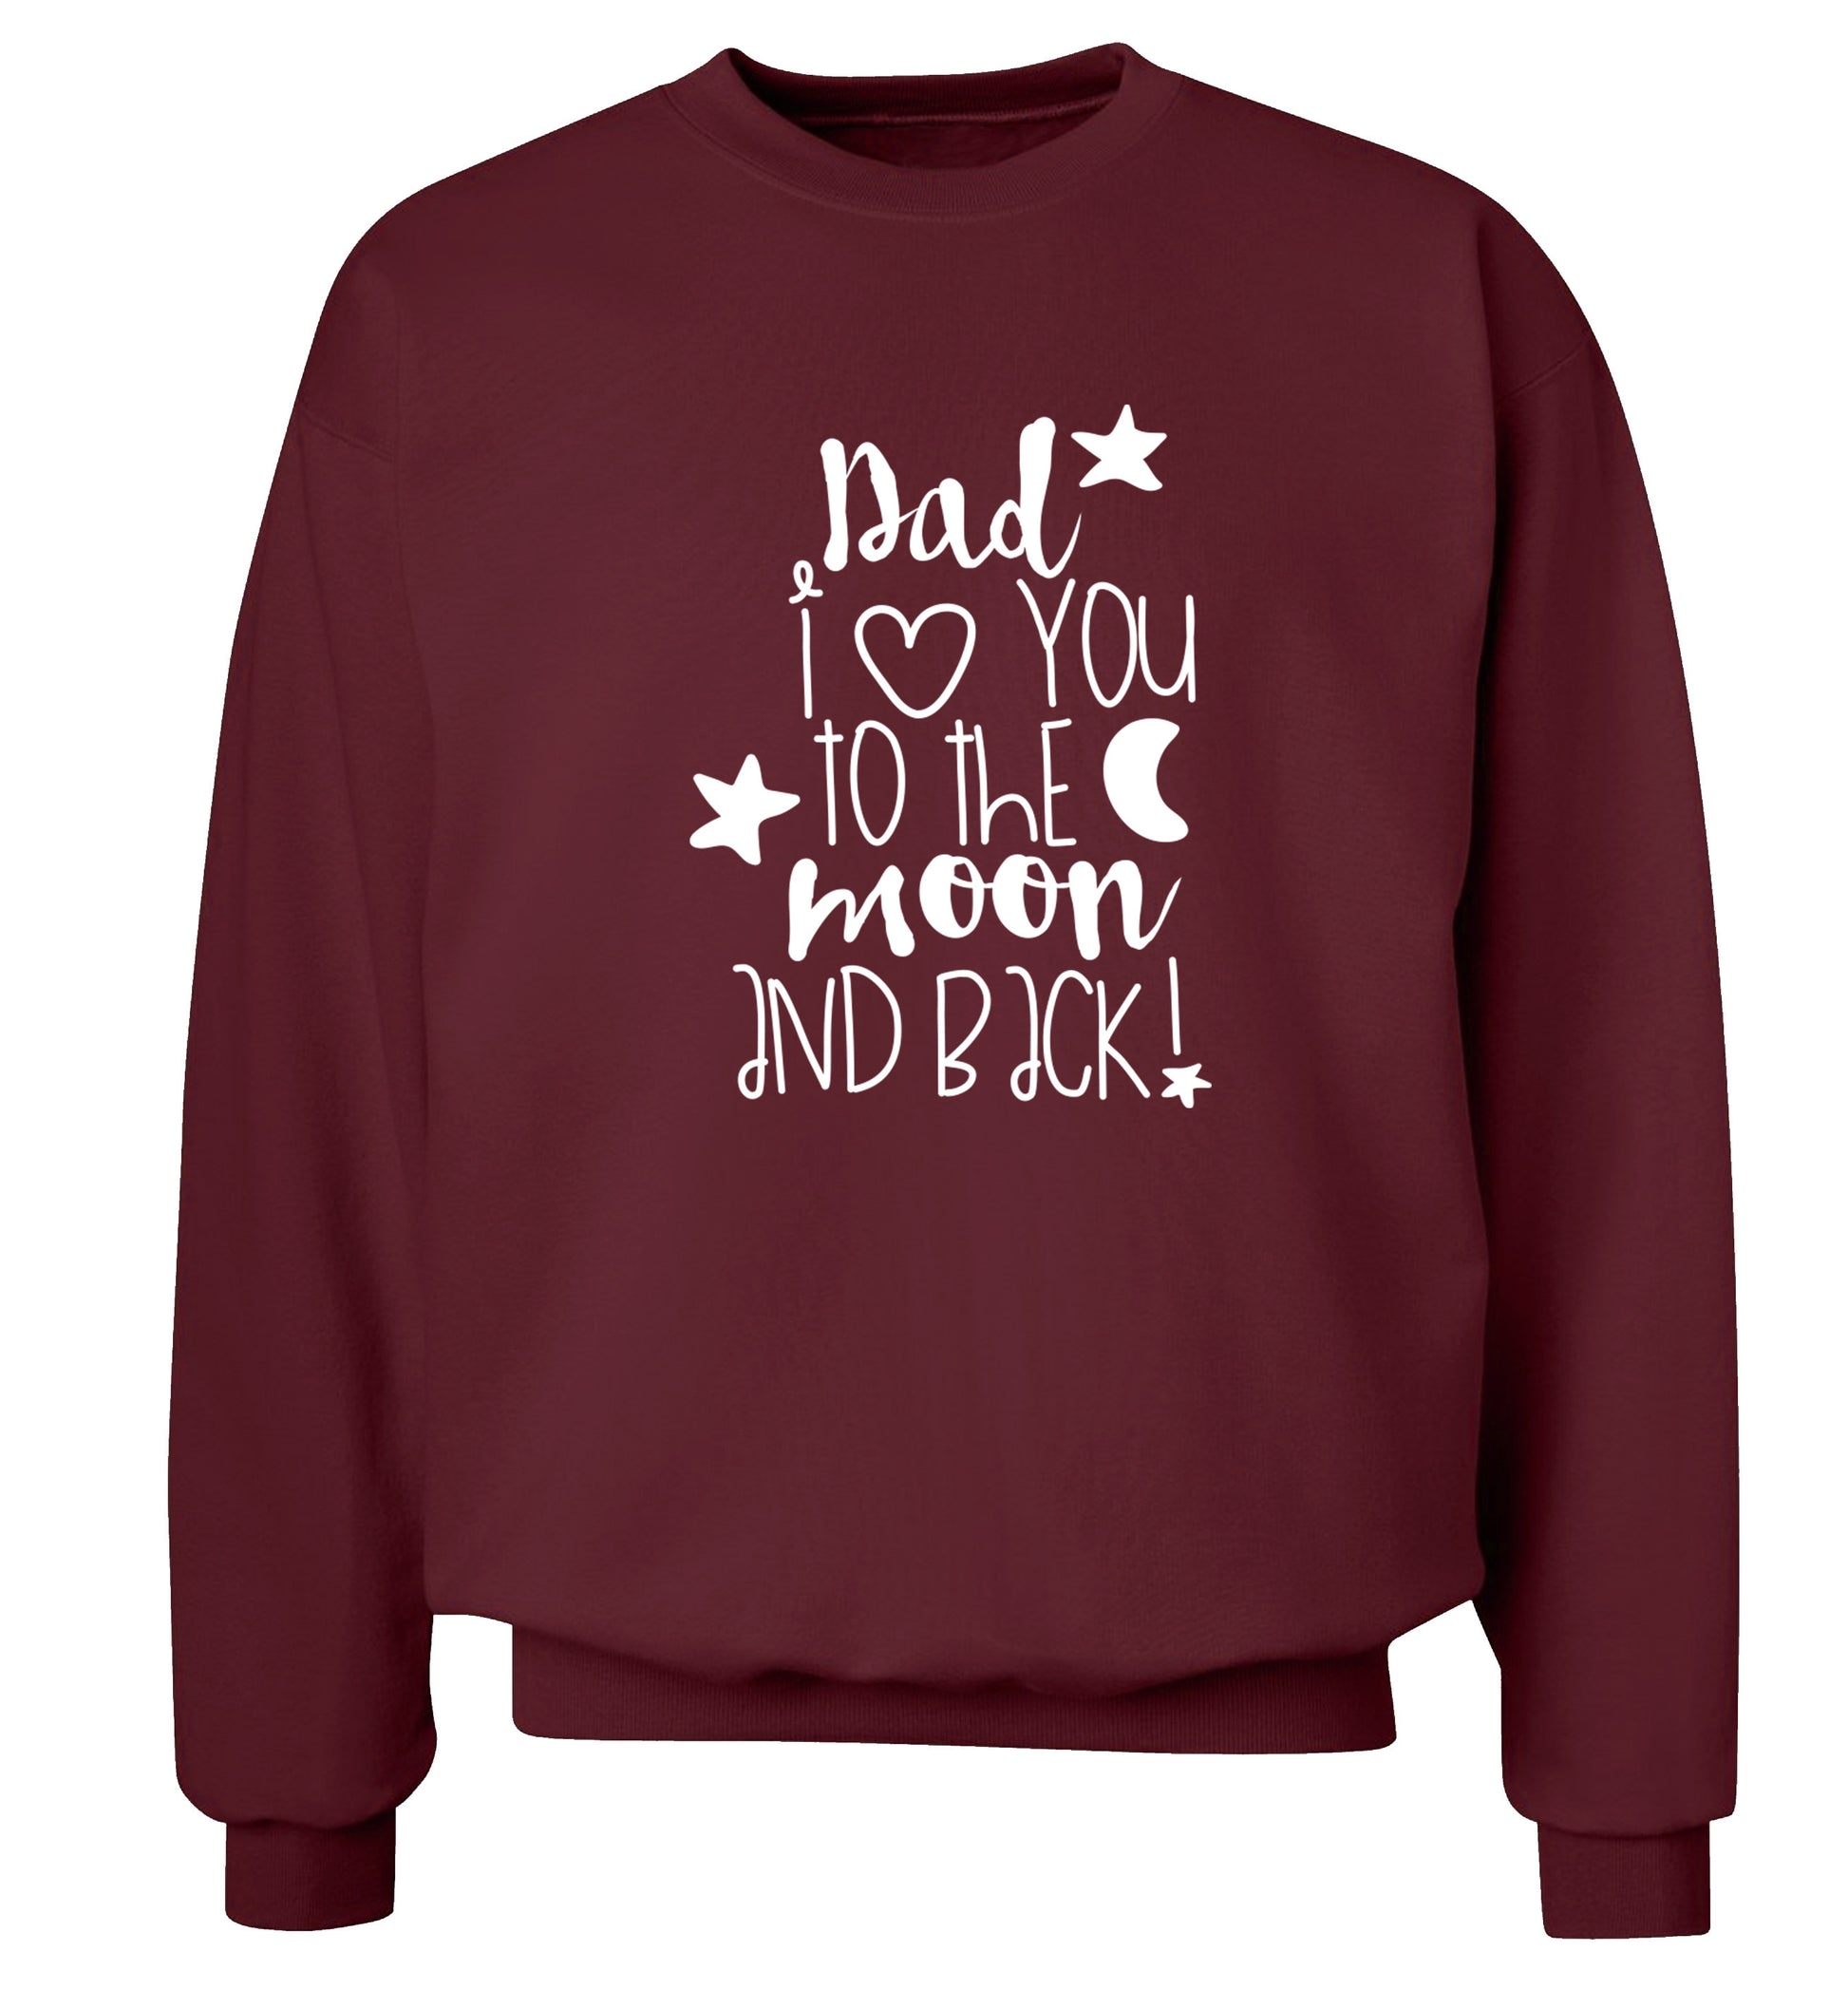 Dad I love you to the moon and back Adult's unisex maroon  sweater 2XL